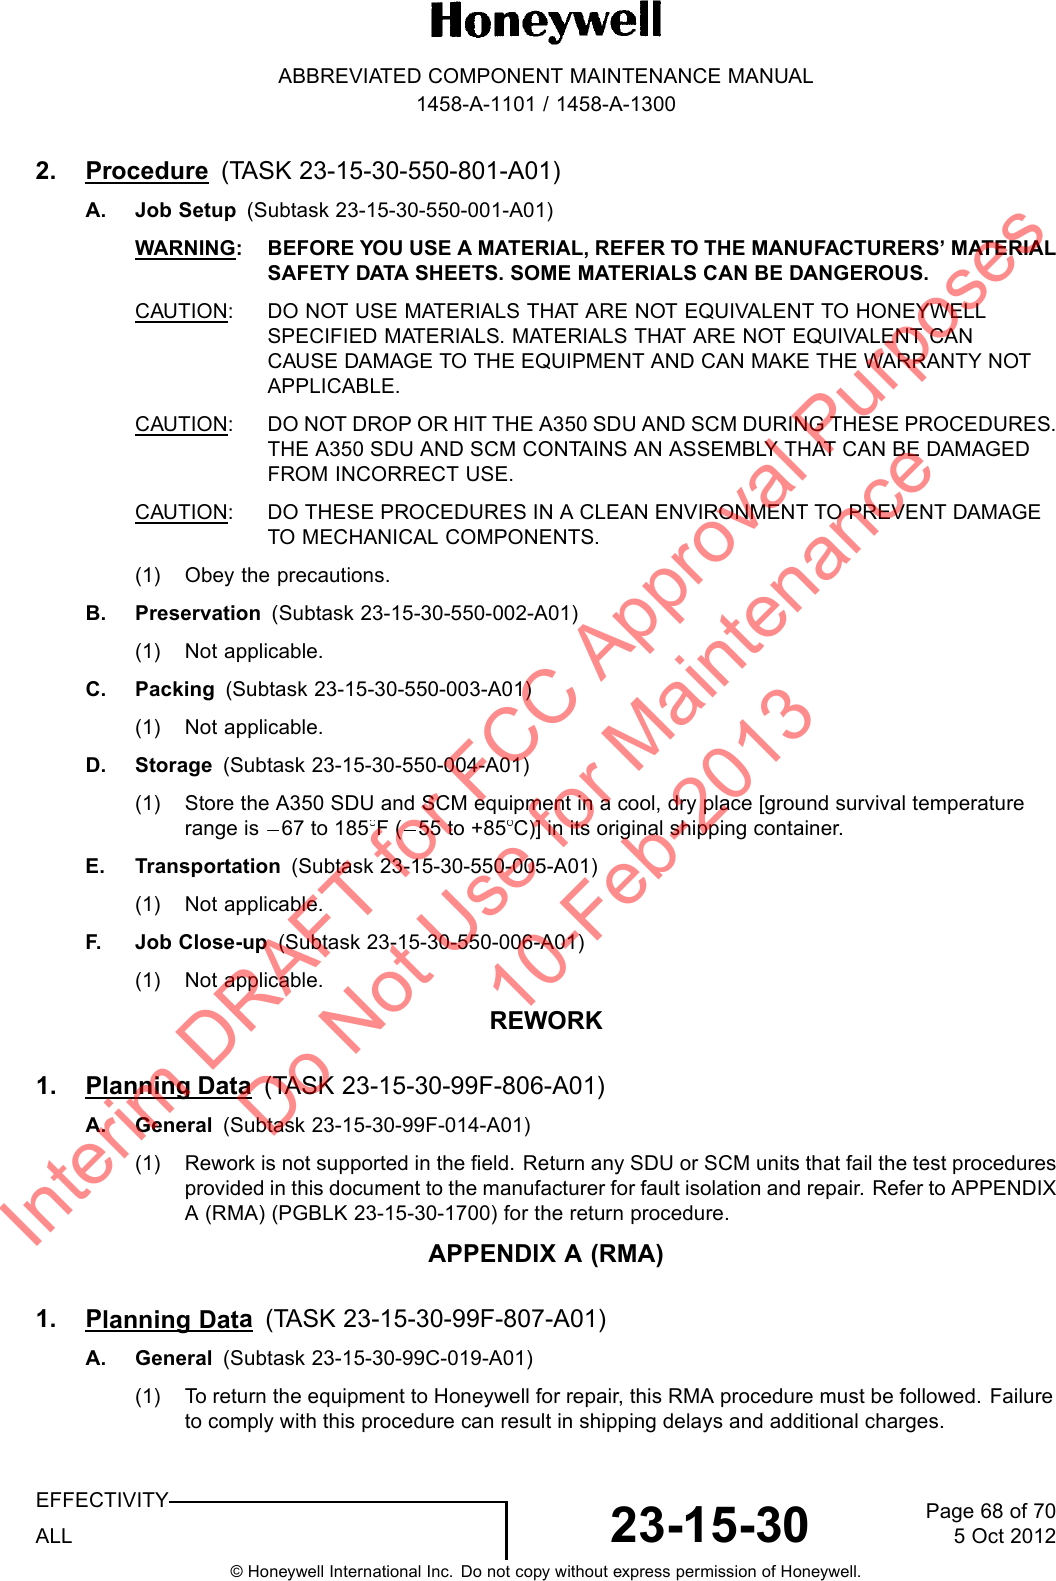 ABBREVIATED COMPONENT MAINTENANCE MANUAL1458-A-1101 / 1458-A-13002. Procedure (TASK 23-15-30-550-801-A01)A. Job Setup (Subtask 23-15-30-550-001-A01)WARNING: BEFORE YOU USE A MATERIAL, REFER TO THE MANUFACTURERS’ MATERIALSAFETY DATA SHEETS. SOME MATERIALS CAN BE DANGEROUS.CAUTION: DO NOT USE MATERIALS THAT ARE NOT EQUIVALENT TO HONEYWELLSPECIFIED MATERIALS. MATERIALS THAT ARE NOT EQUIVALENT CANCAUSE DAMAGE TO THE EQUIPMENT AND CAN MAKE THE WARRANTY NOTAPPLICABLE.CAUTION: DO NOT DROP OR HIT THE A350 SDU AND SCM DURING THESE PROCEDURES.THE A350 SDU AND SCM CONTAINS AN ASSEMBLY THAT CAN BE DAMAGEDFROM INCORRECT USE.CAUTION: DO THESE PROCEDURES IN A CLEAN ENVIRONMENT TO PREVENT DAMAGETO MECHANICAL COMPONENTS.(1) Obey the precautions.B. Preservation (Subtask 23-15-30-550-002-A01)(1) Not applicable.C. Packing (Subtask 23-15-30-550-003-A01)(1) Not applicable.D. Storage (Subtask 23-15-30-550-004-A01)(1) Store the A350 SDU and SCM equipment in a cool, dry place [ground survival temperaturerange is 67 to 185 F( 55 to +85 C)] in its original shipping container.E. Transportation (Subtask 23-15-30-550-005-A01)(1) Not applicable.F. J o b C l o s e - up (Subtask 23-15-30-550-006-A01)(1) Not applicable.REWORK1. Planning Data (TASK 23-15-30-99F-806-A01)A. General (Subtask 23-15-30-99F-014-A01)(1) Rework is not supported in the field. Return any SDU or SCM units that fail the test proceduresprovided in this document to the manufacturer for fault isolation and repair. Refer to APPENDIXA (RMA) (PGBLK 23-15-30-1700) for the return procedure.APPENDIX A (RMA)1. Planning Data(TASK 23-15-30-99F-807-A01)A. General (Subtask 23-15-30-99C-019-A01)(1) To return the equipment to Honeywell for repair, this RMA procedure must be followed. Failureto comply with this procedure can result in shipping delays and additional charges.EFFECTIVITYALL 23-15-30 Page 68 of 705 Oct 2012© Honeywell International Inc. Do not copy without express permission of Honeywell.Interim DRAFT for FCC Approval Purposes Do Not Use for Maintenance 10-Feb-2013